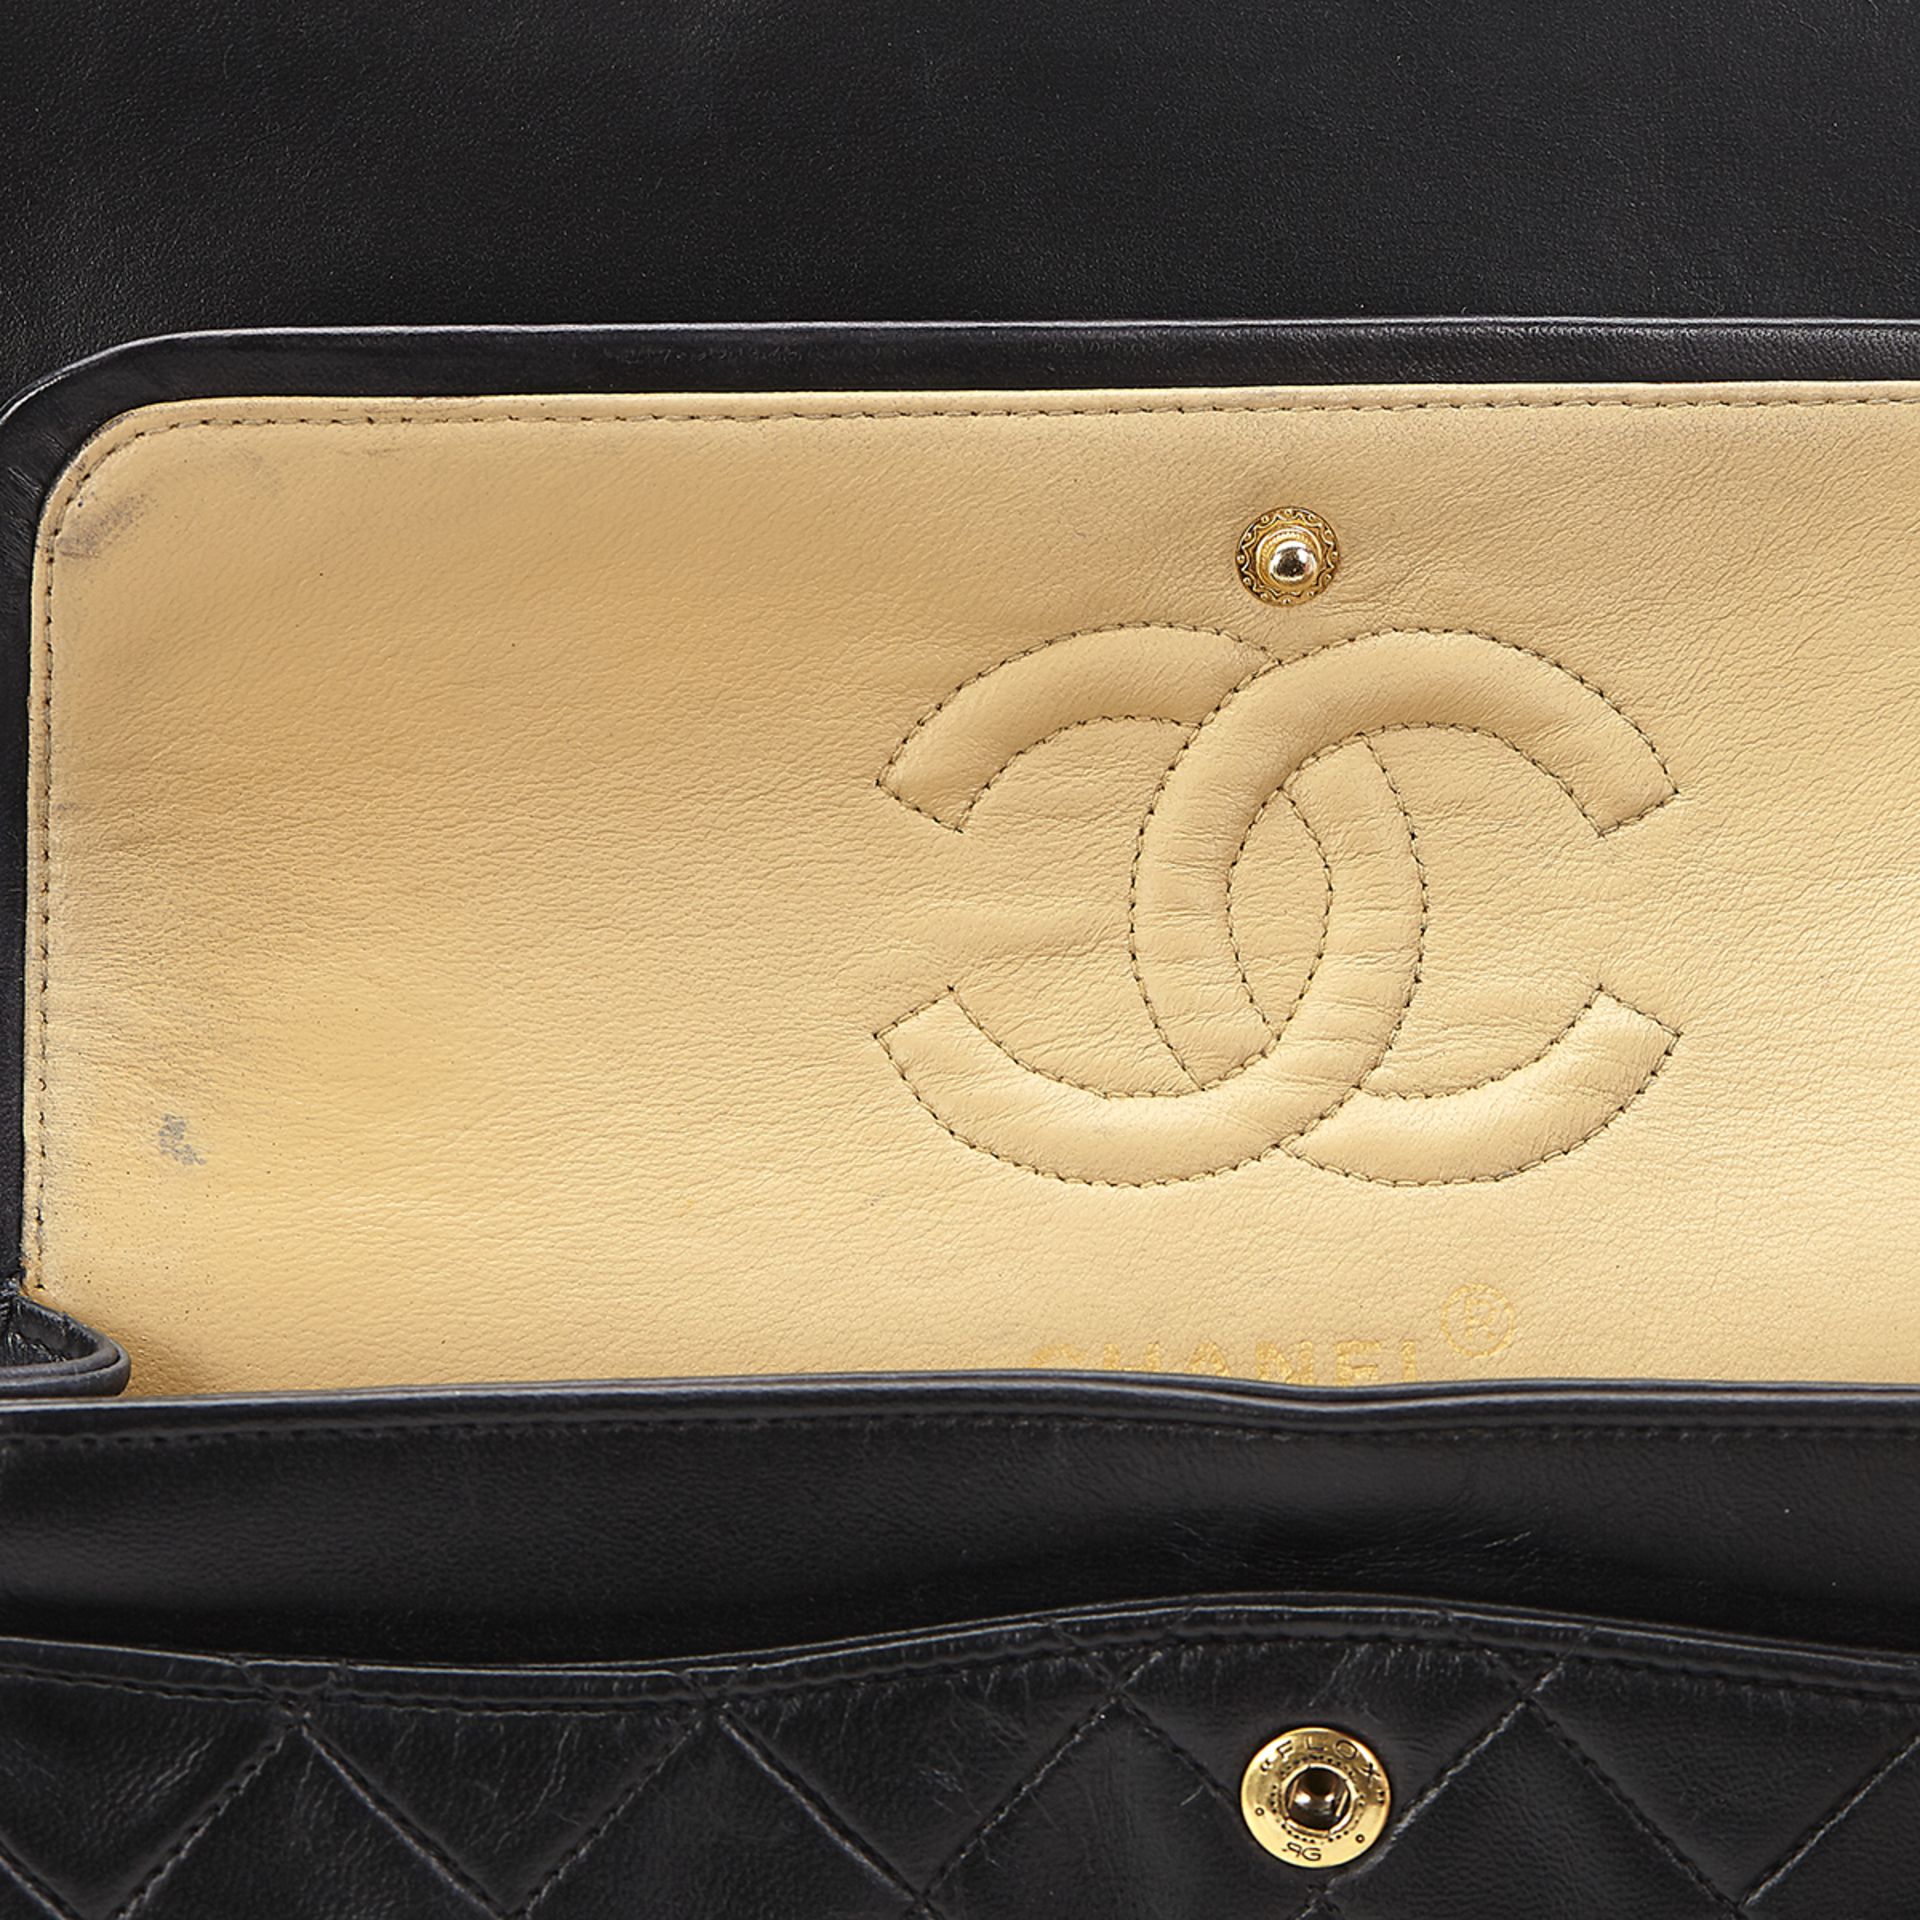 Chanel, Small Classic Double Flap Bag - Image 7 of 9